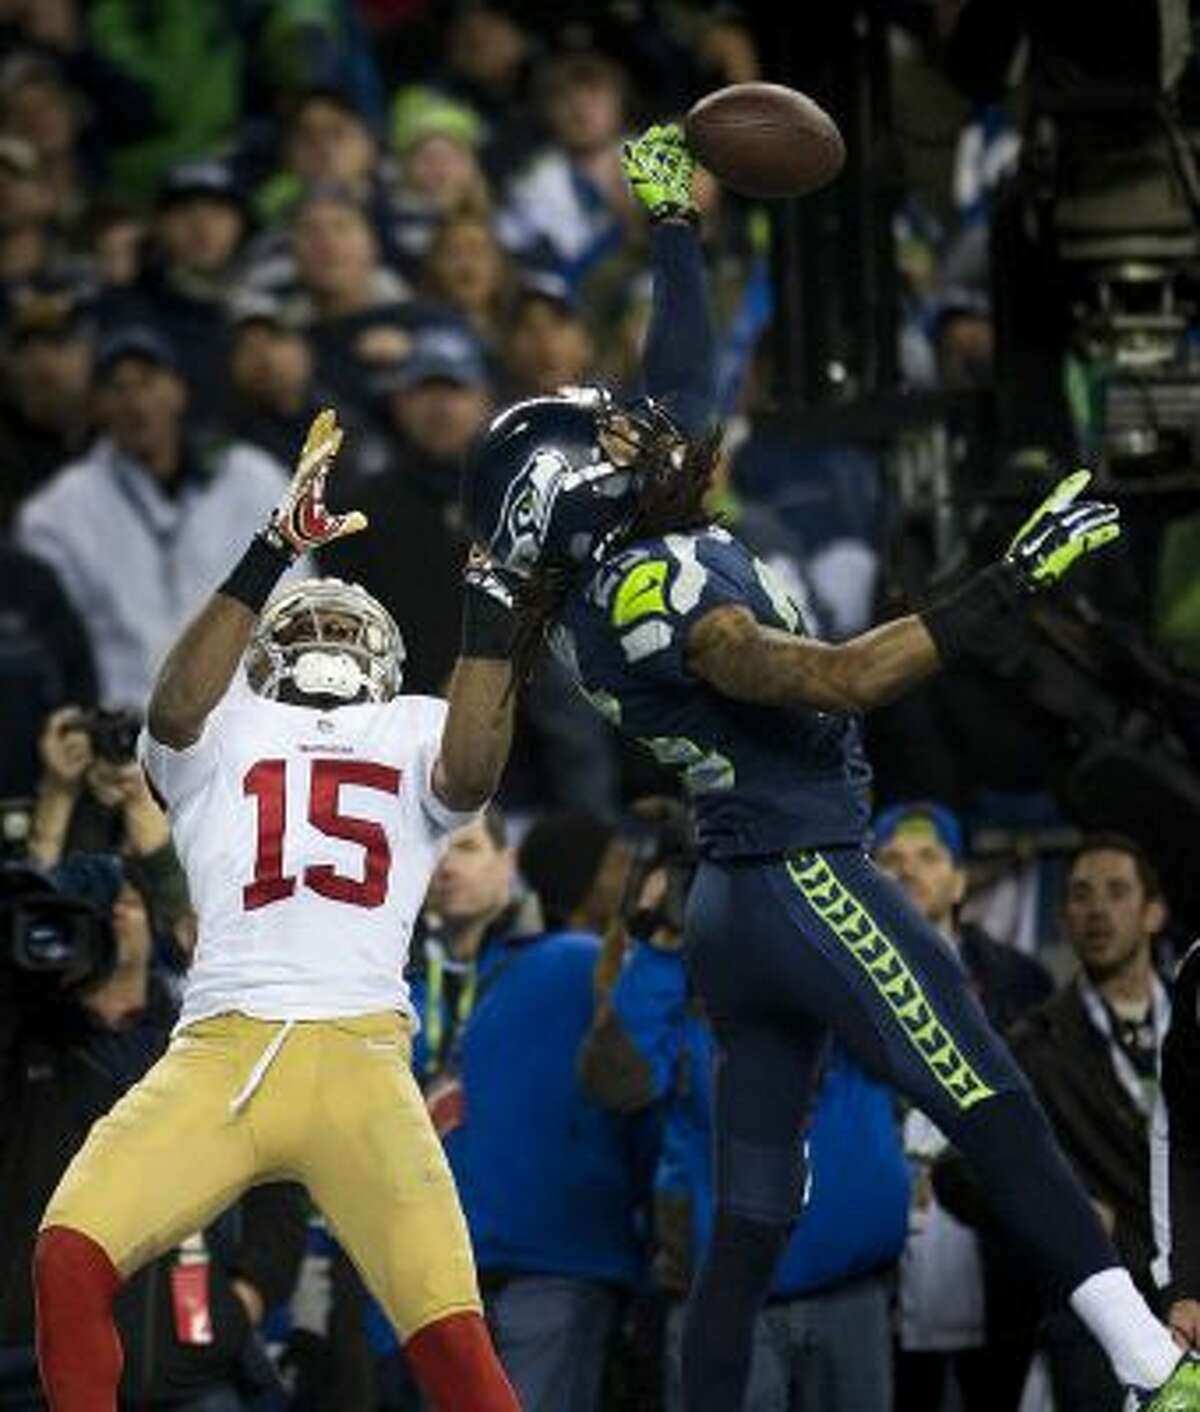 Seattle Seahawks cornerback Richard Sherman (25) hits the ball away from San Francisco 49ers wide receiver Michael Crabtree (15) and is intercepted by Seattle Seahawks outside linebacker Malcolm Smith (53) during the NFC Championship game.